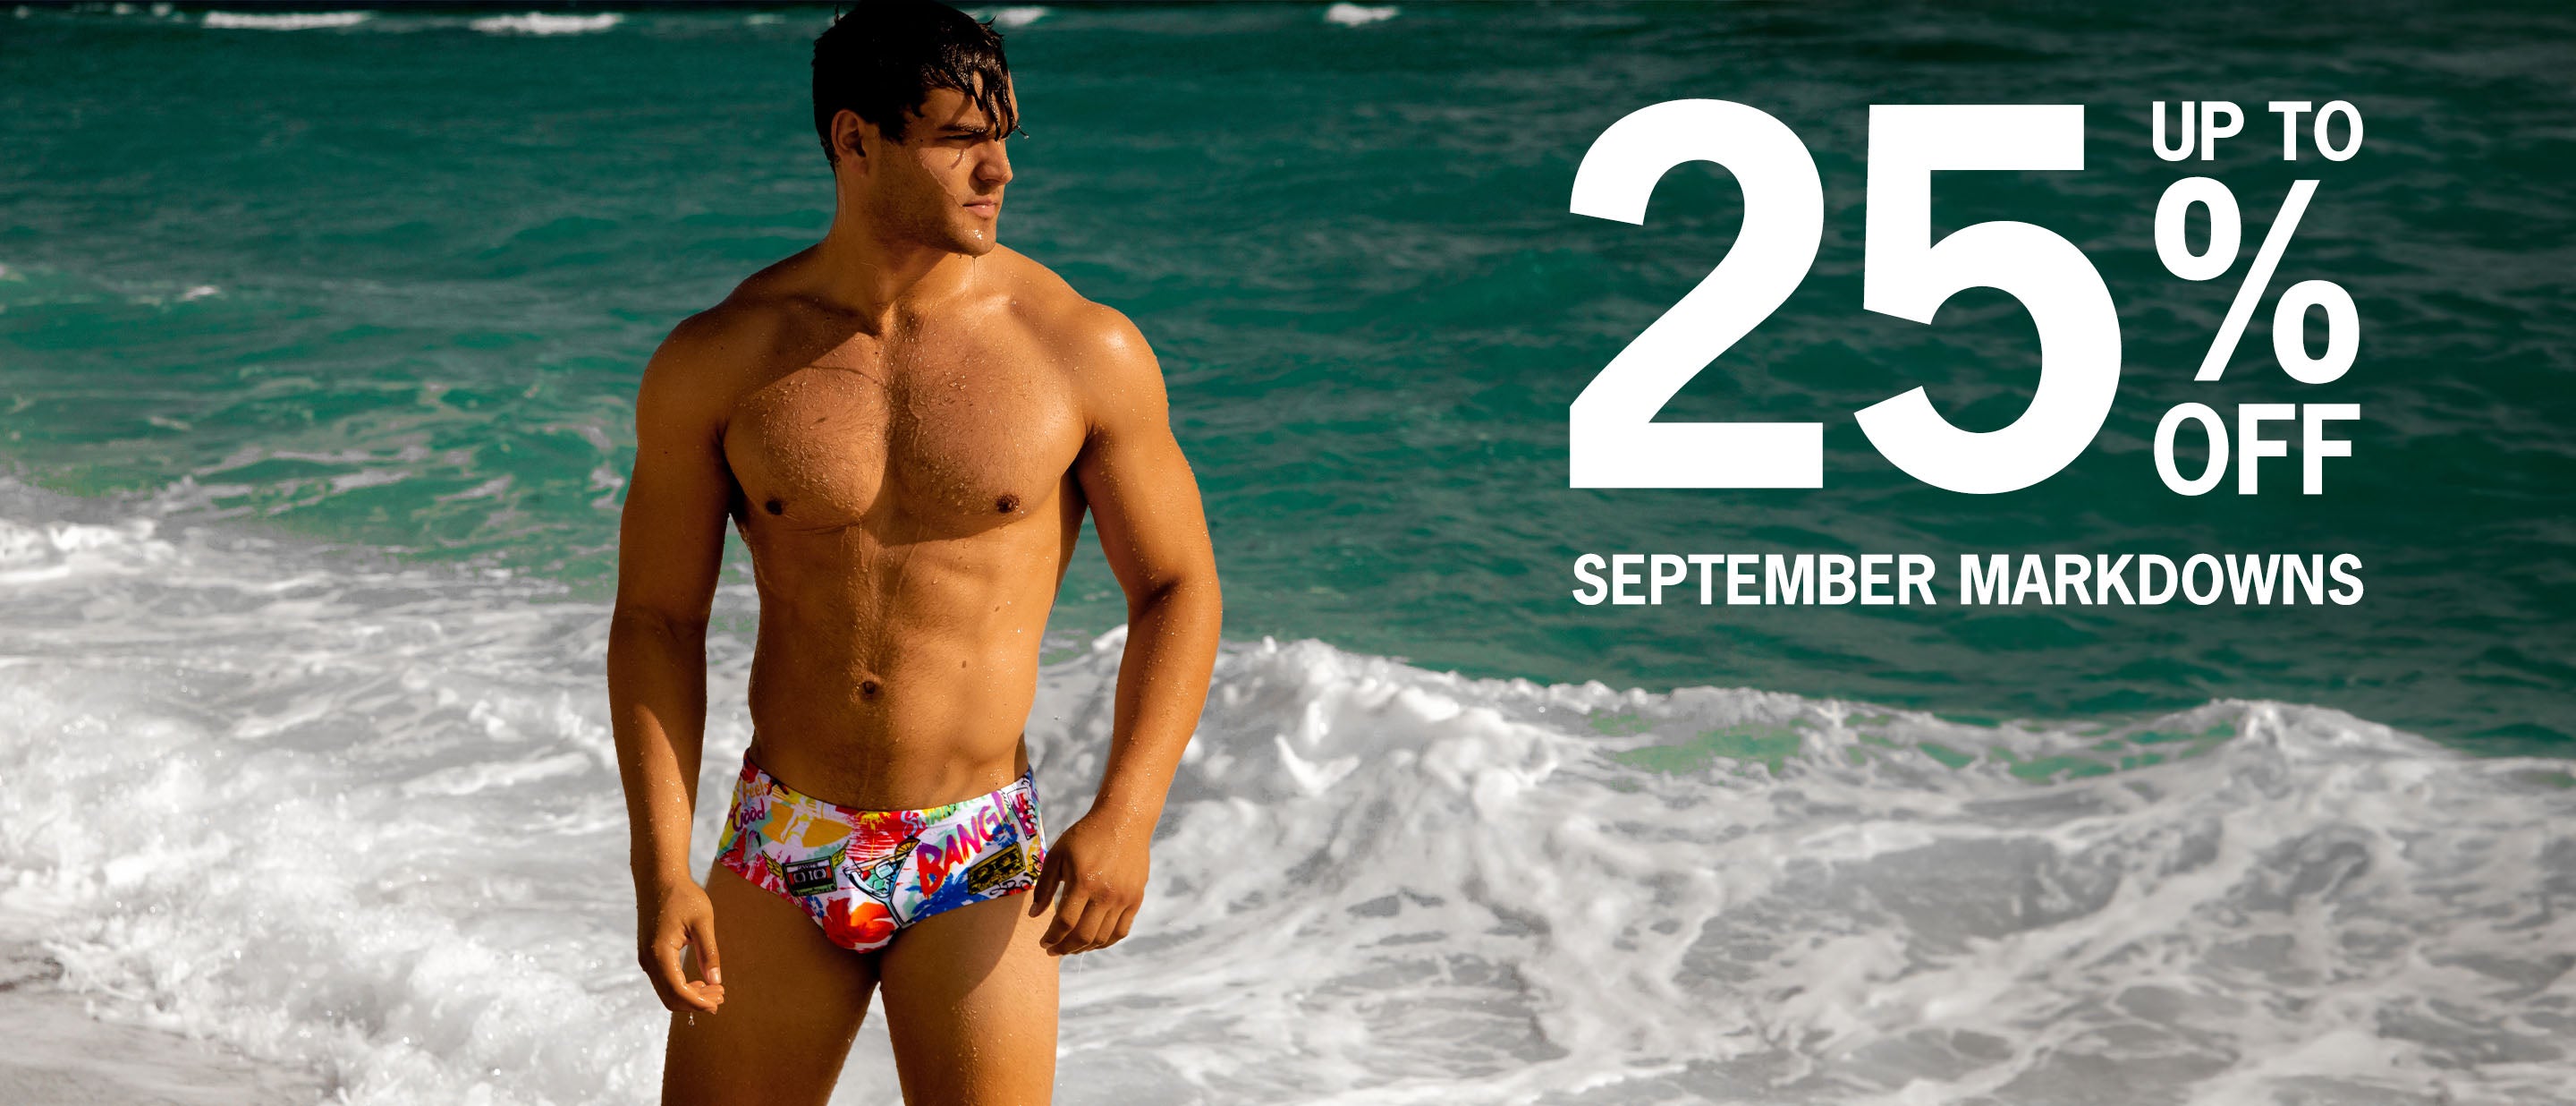 September Markdowns. Enjoy up to 25% Off on a selection of over 200+ items of men's beachwear, swimsuits, summer tank tops, shirts and shorts for a limited time.